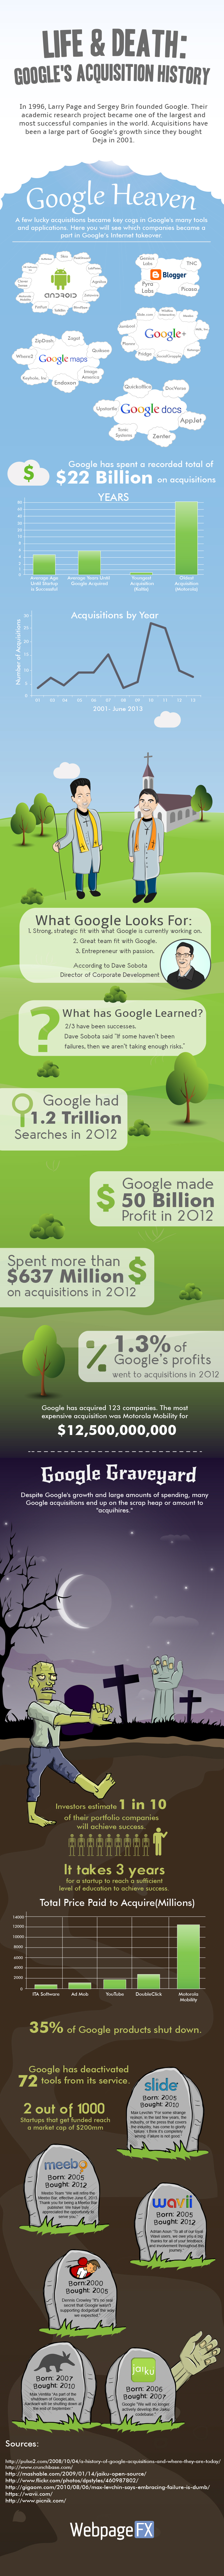 google-acquisitions-infographic